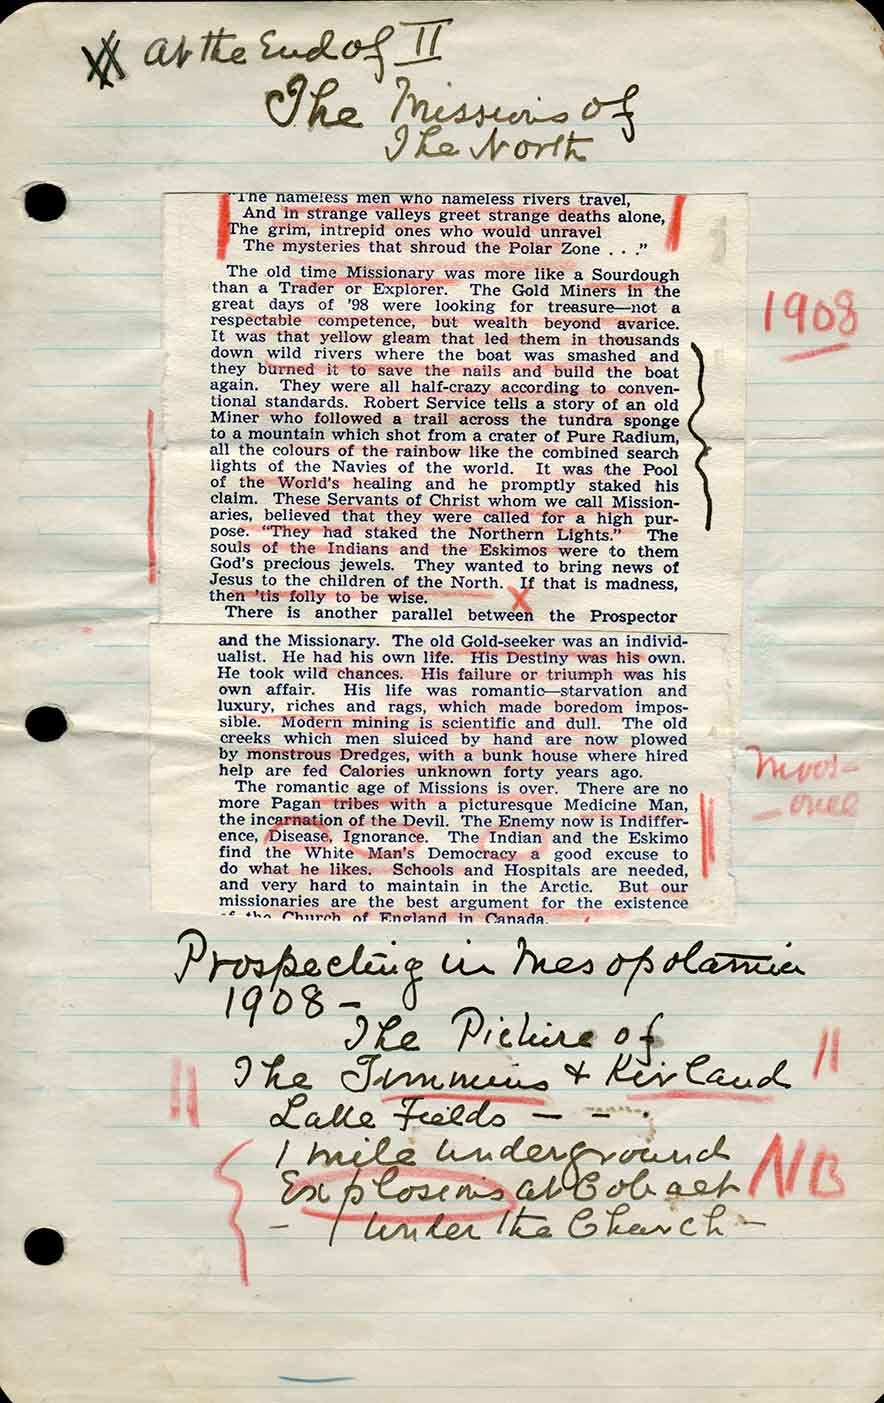 First page of sermon “Missions of the North” (1908)